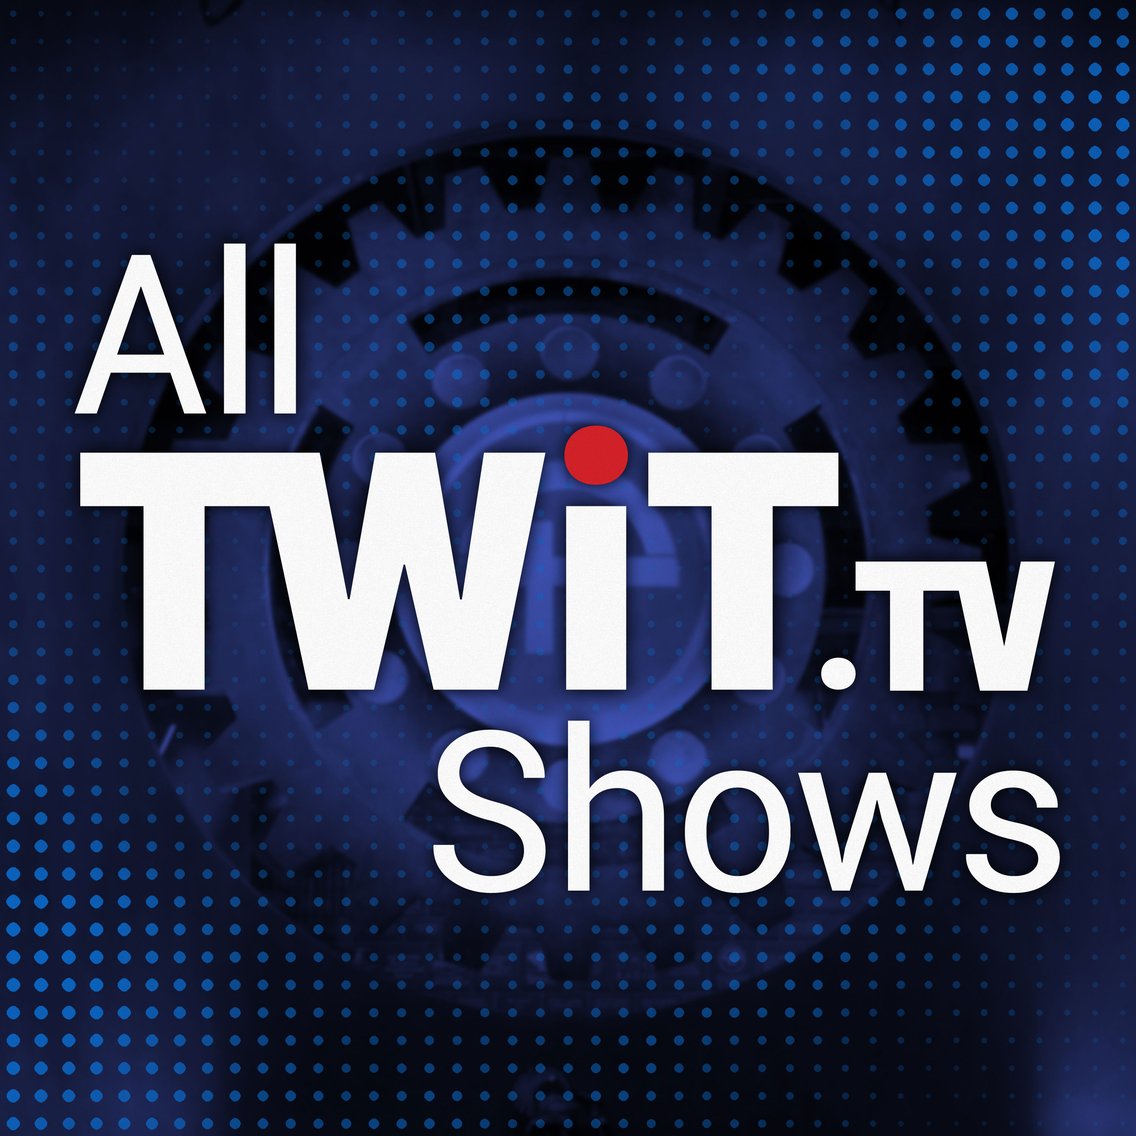 All TWiT.tv Shows - Cover Image